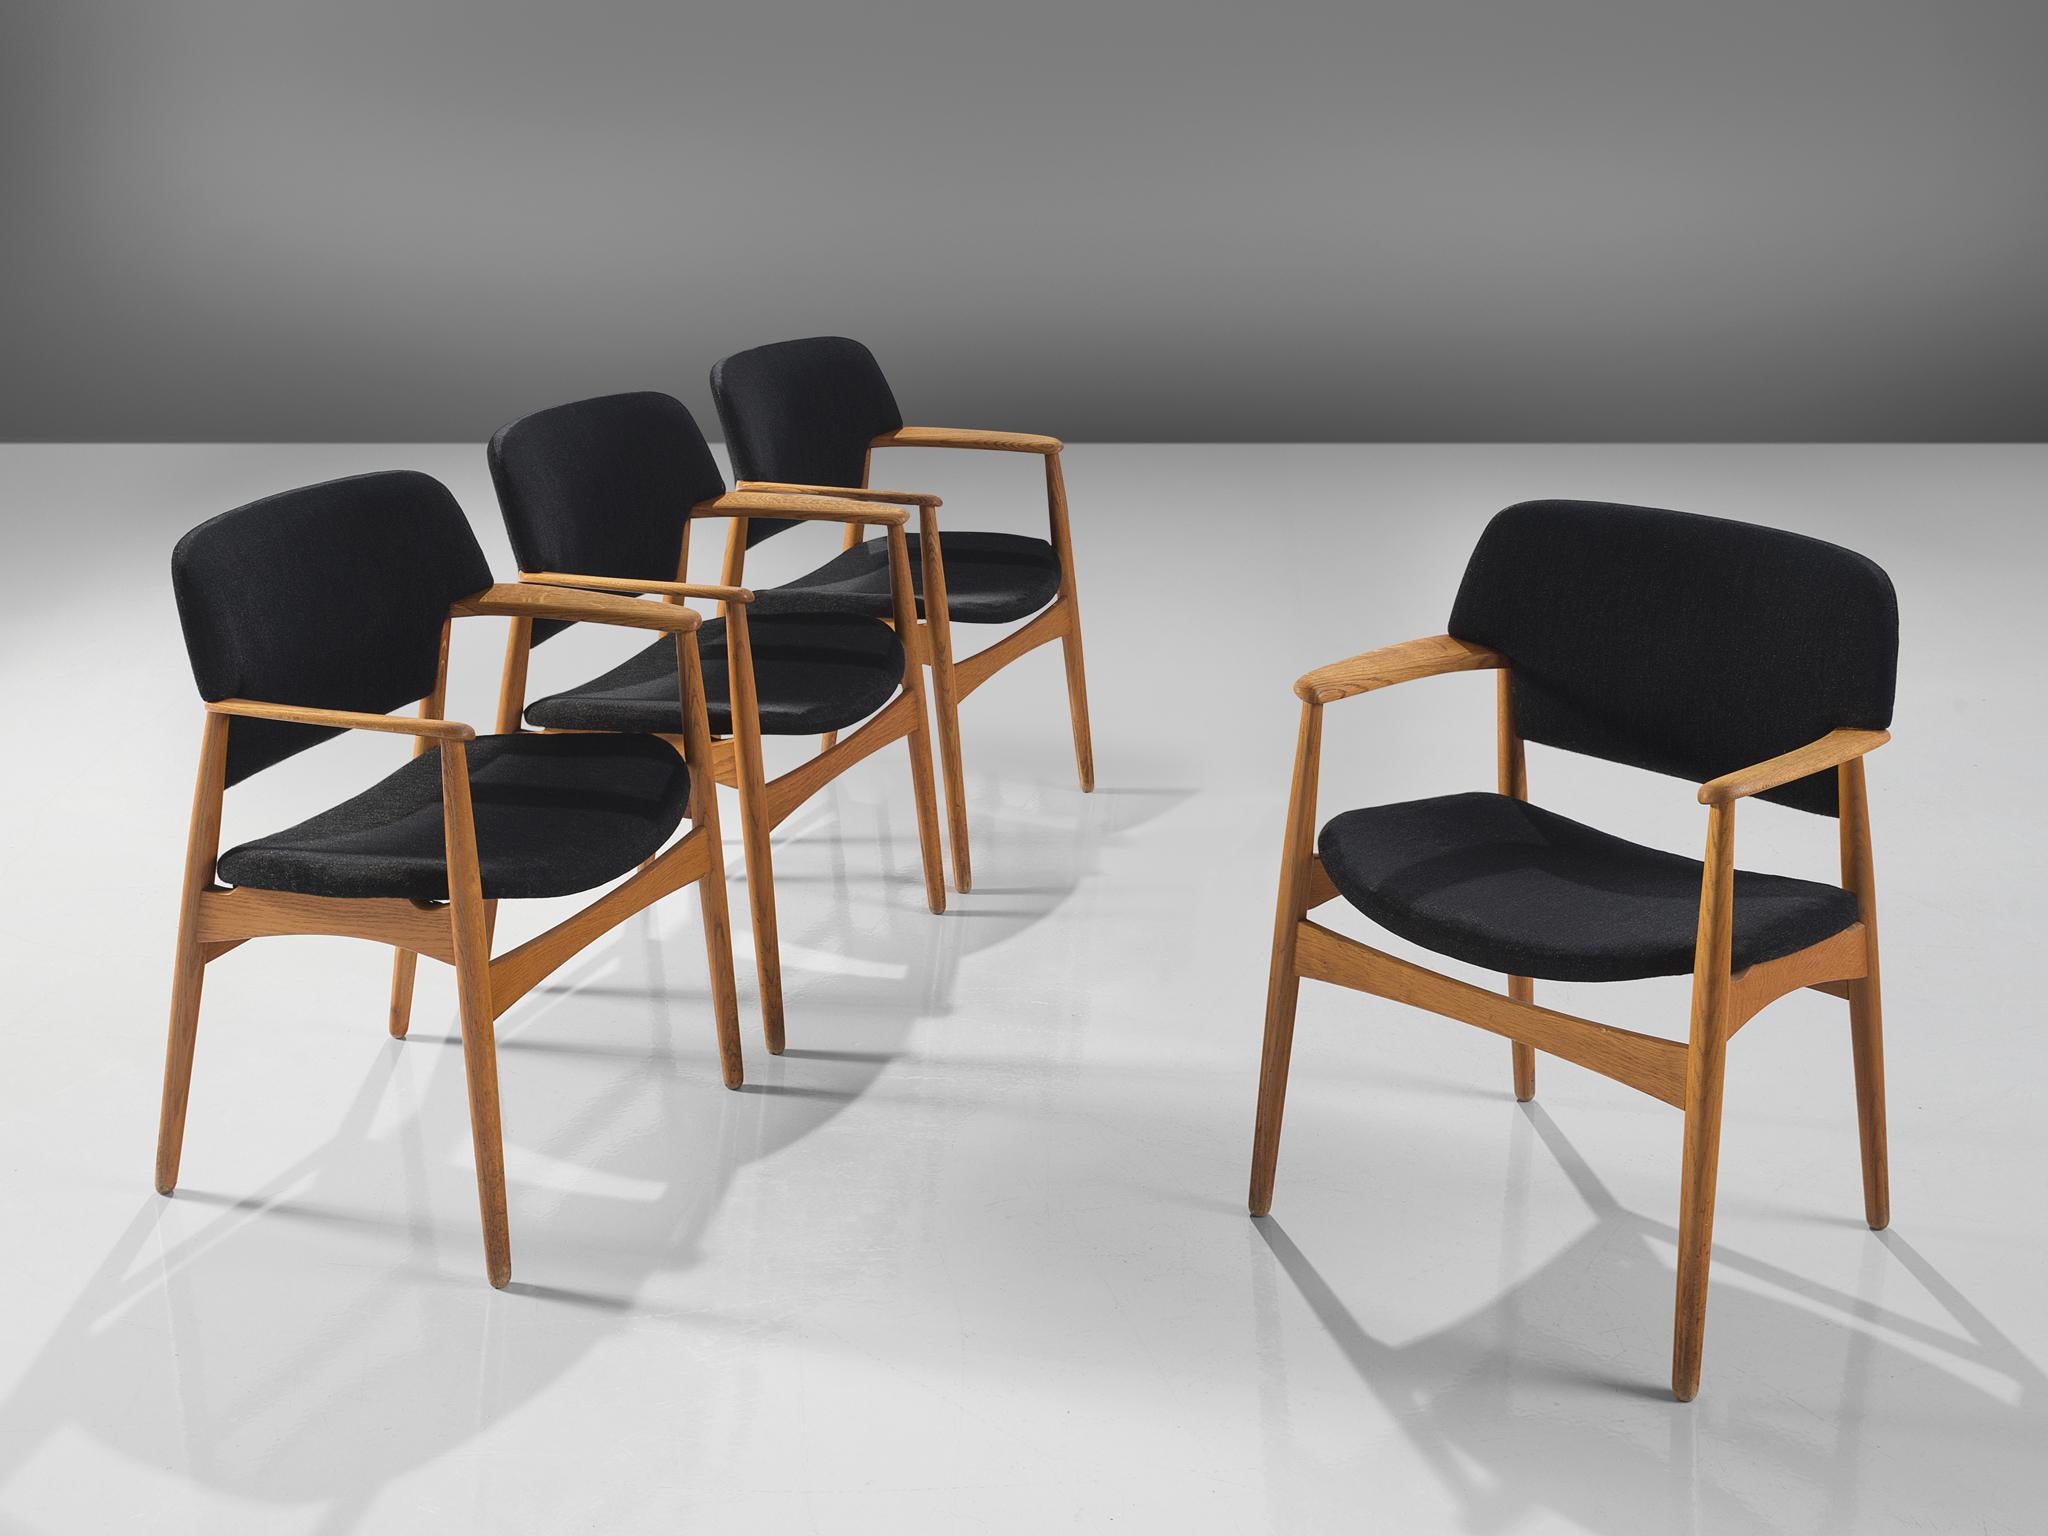 Aksel Bender Madsen for Fritz Hansen, set f four dining chairs, oak, black upholstery, Denmark, circa 1955

This set of four Danish dining chairs feature a blond oak frame that forms a great colour palette with the black fabric. The chairs are solid